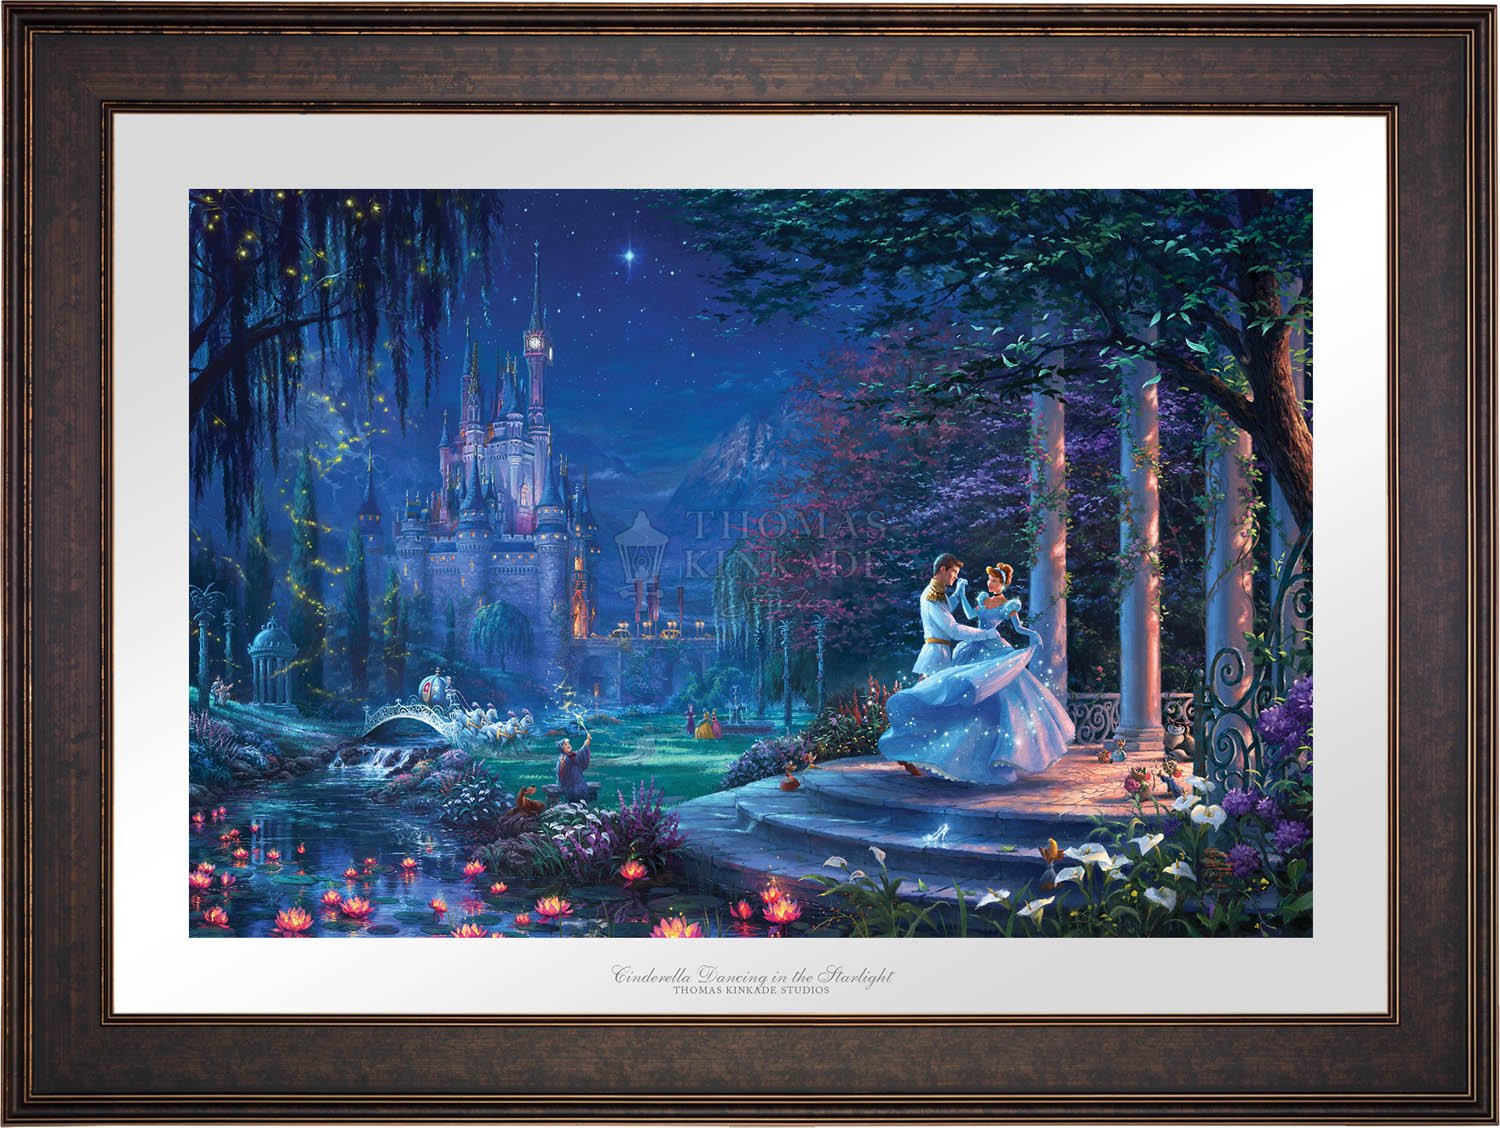 Cinderella's dreams have come true under the starlight Cinderella is in the arms of her prince - Gallery Bronze Frame